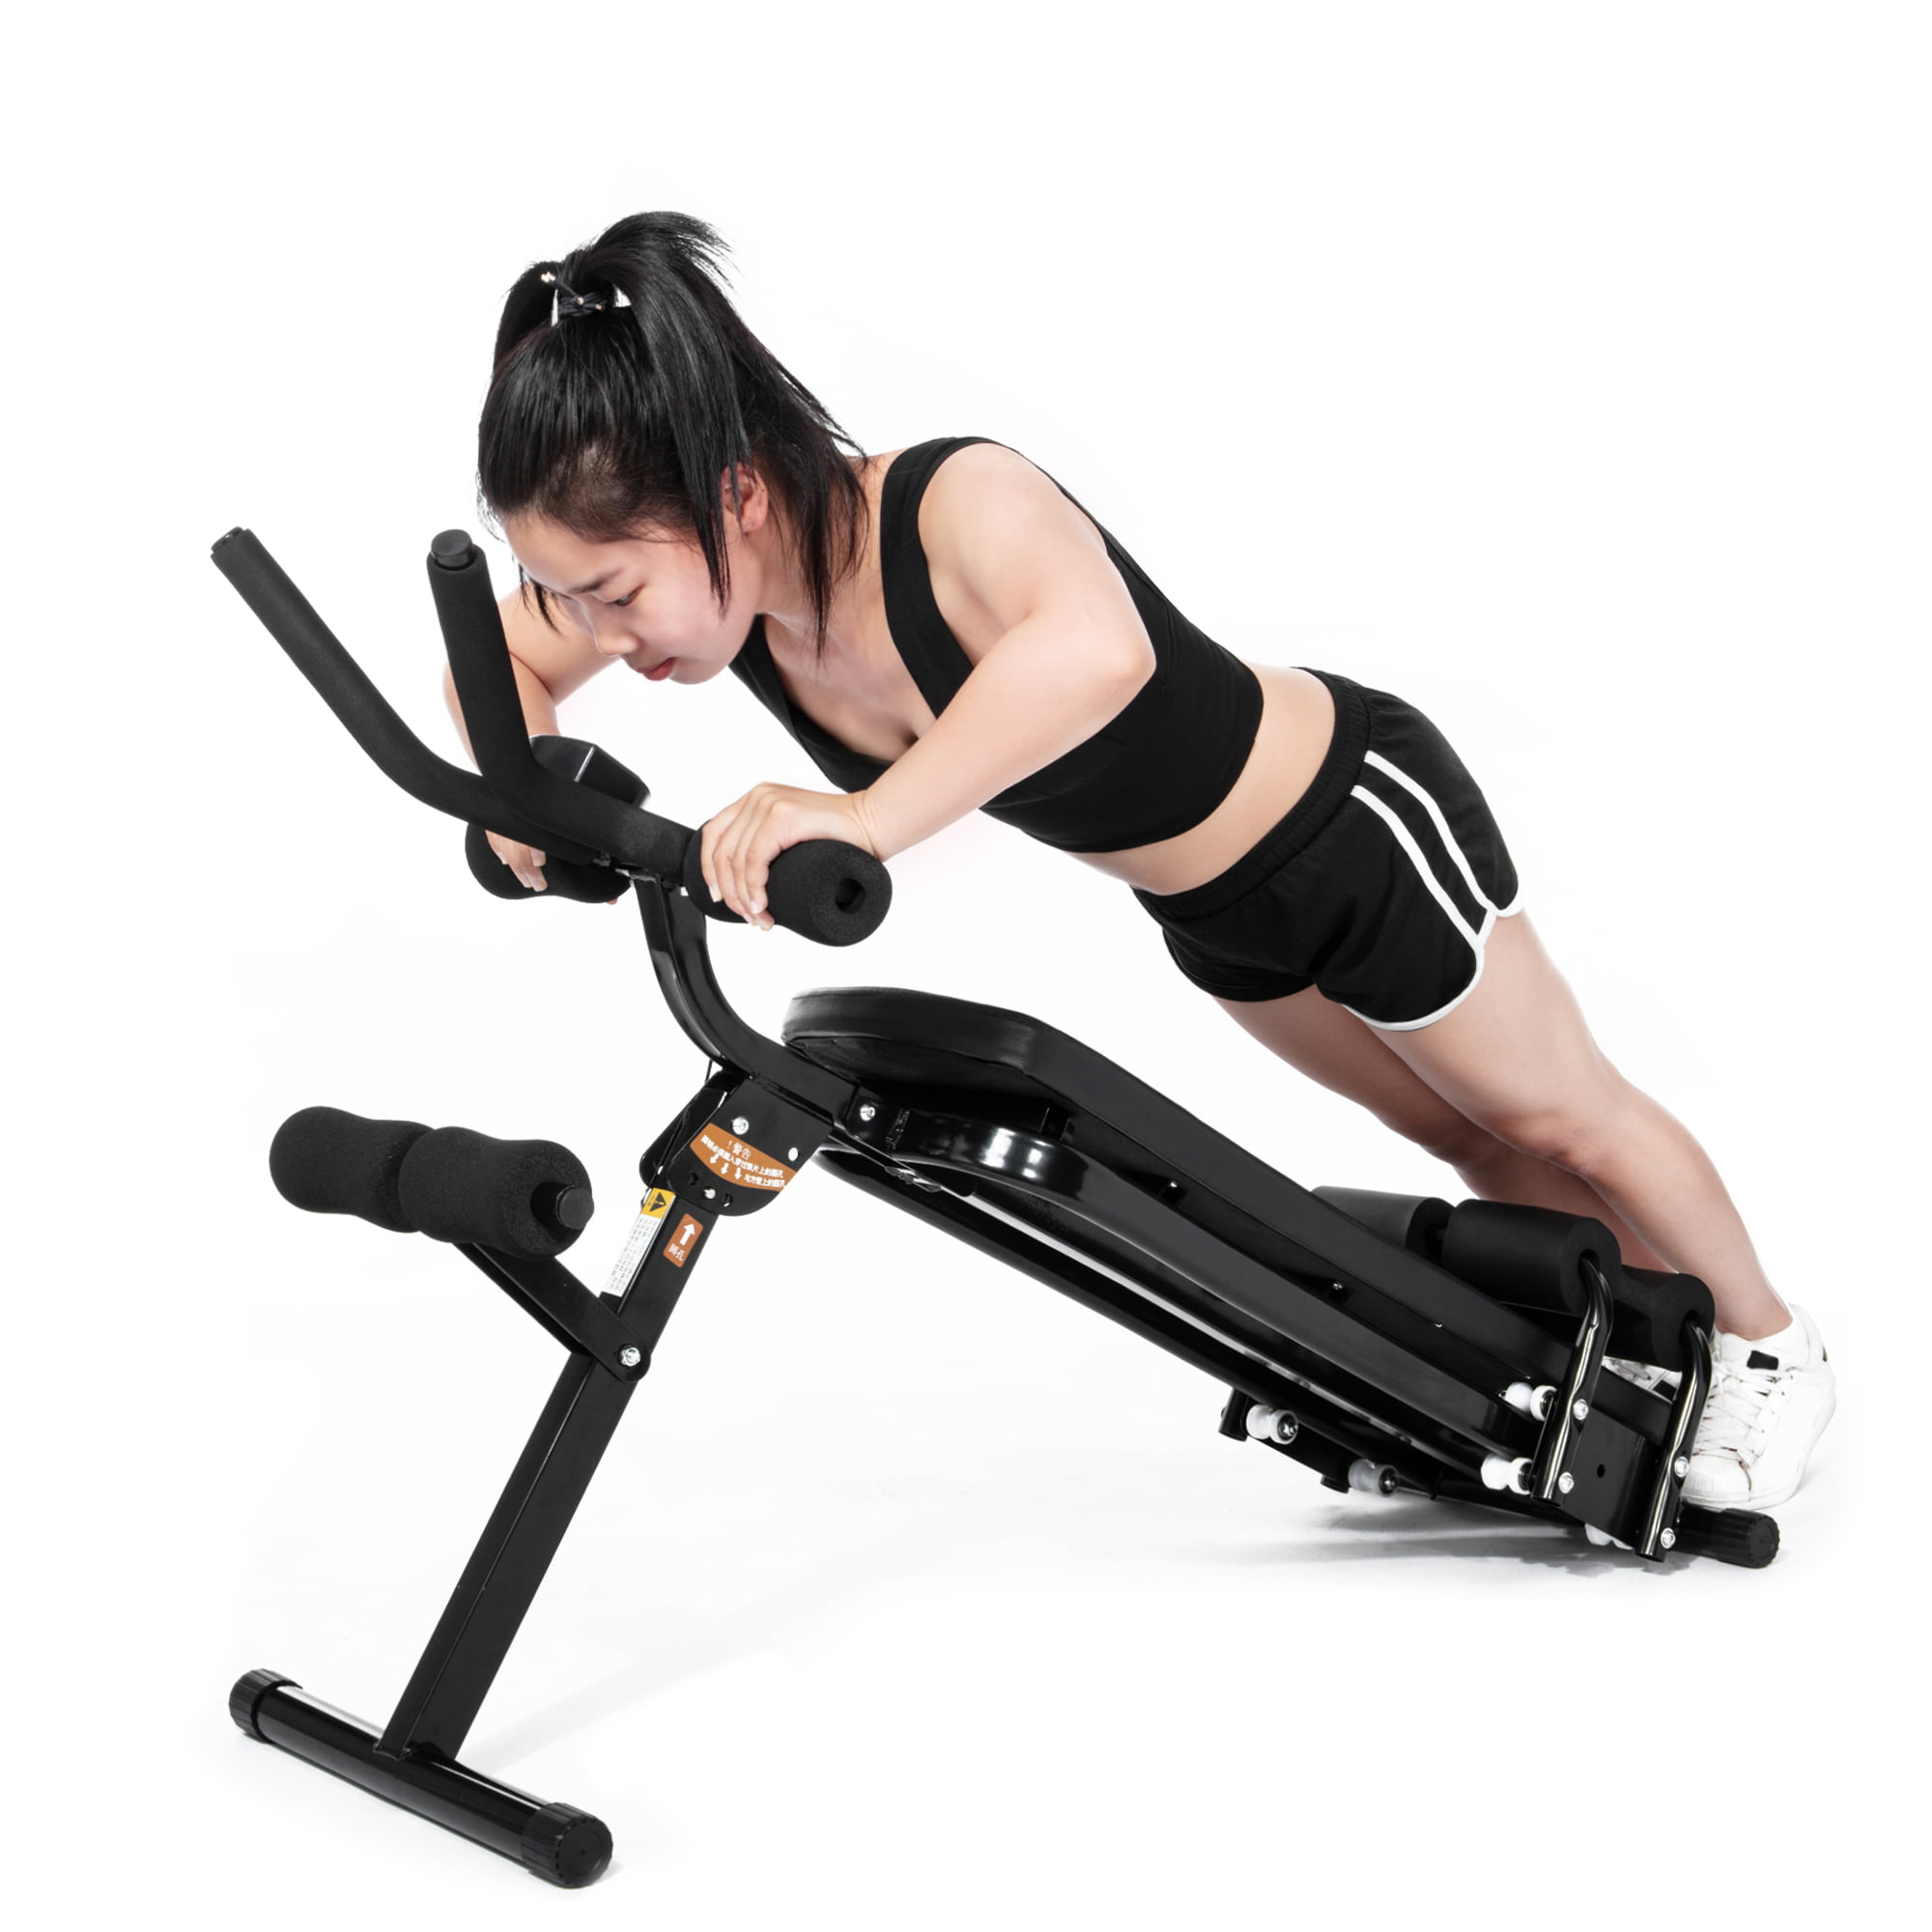 Suitable for Sit-ups Training Bench Foldable SportPlus Multifunctional Weight Bench Back and Abdominal Trainer 